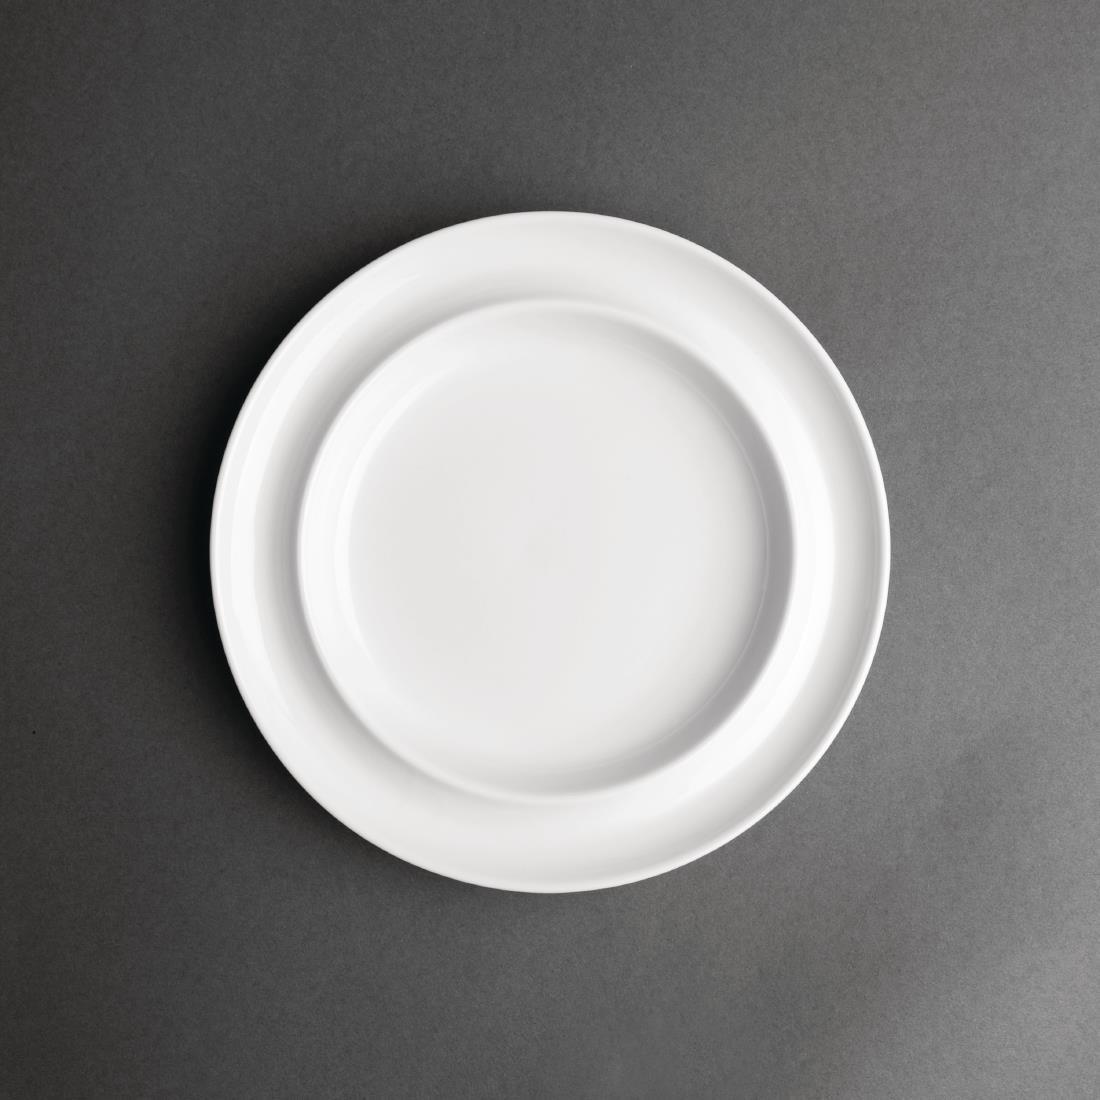 Olympia Heritage Raised Rim Plates White 203mm (Pack of 4) - DW152  - 1